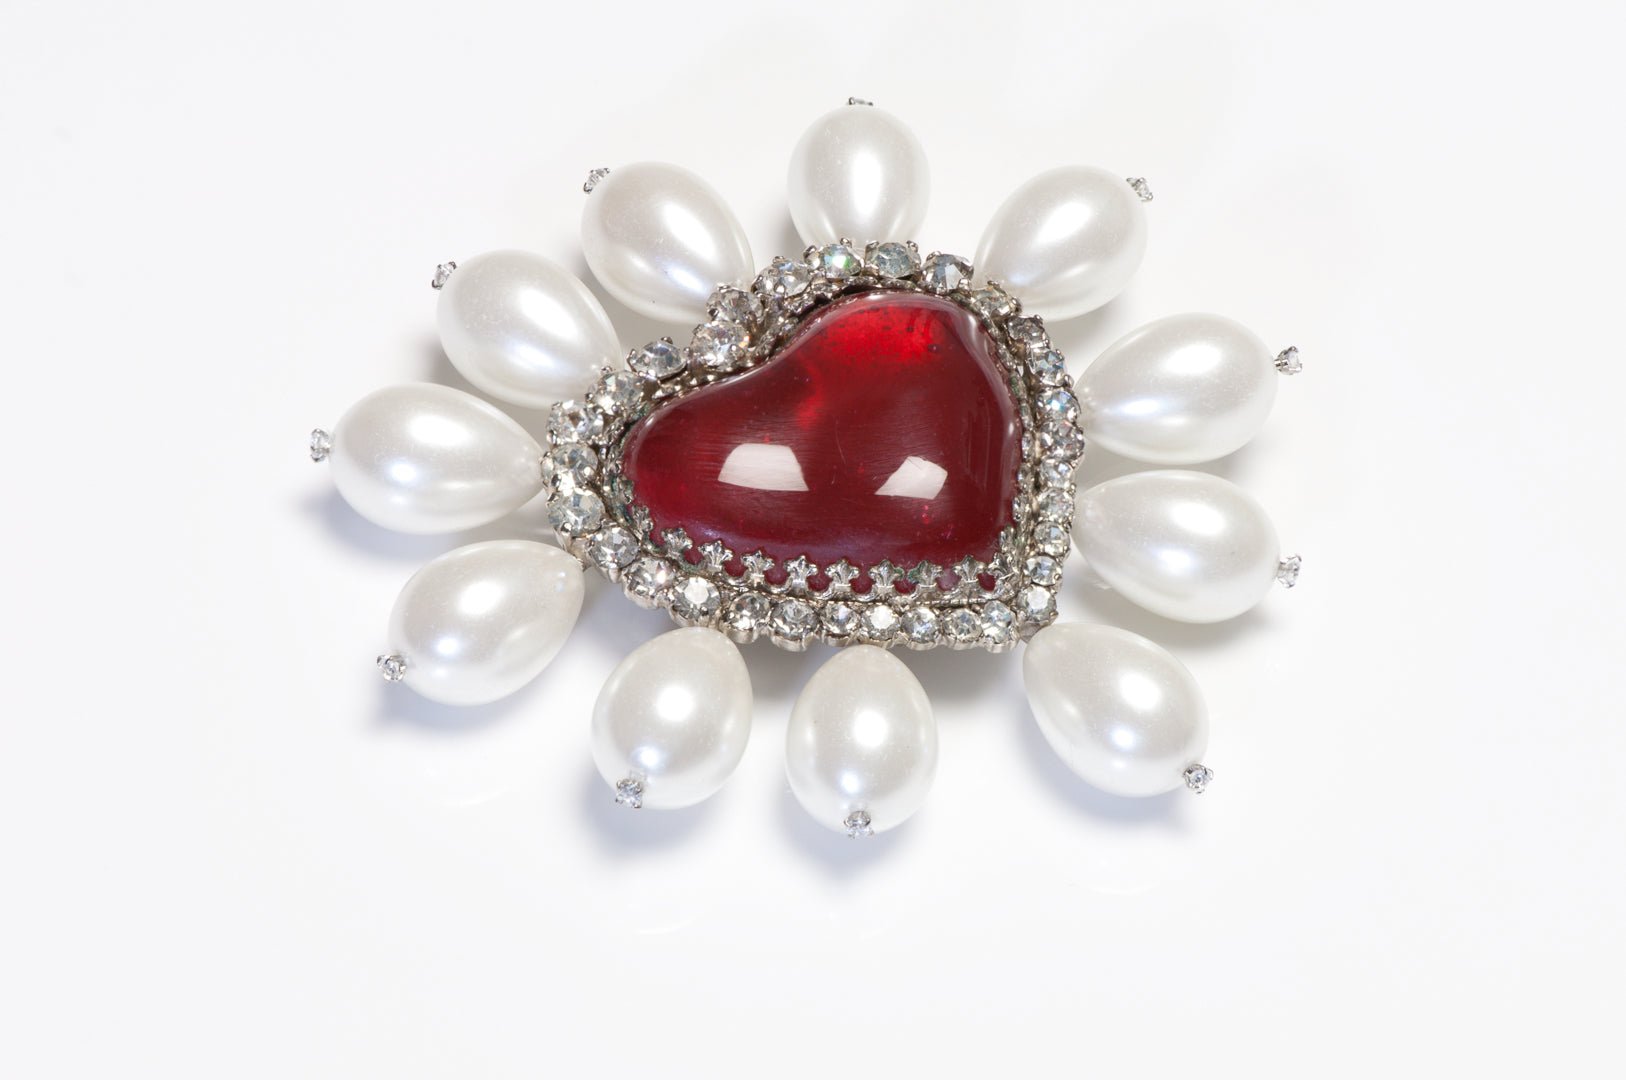 Christian Dior Paris Couture 1950’s Maison Gripoix Red Glass Pearl Heart Brooch - DSF Antique Jewelry